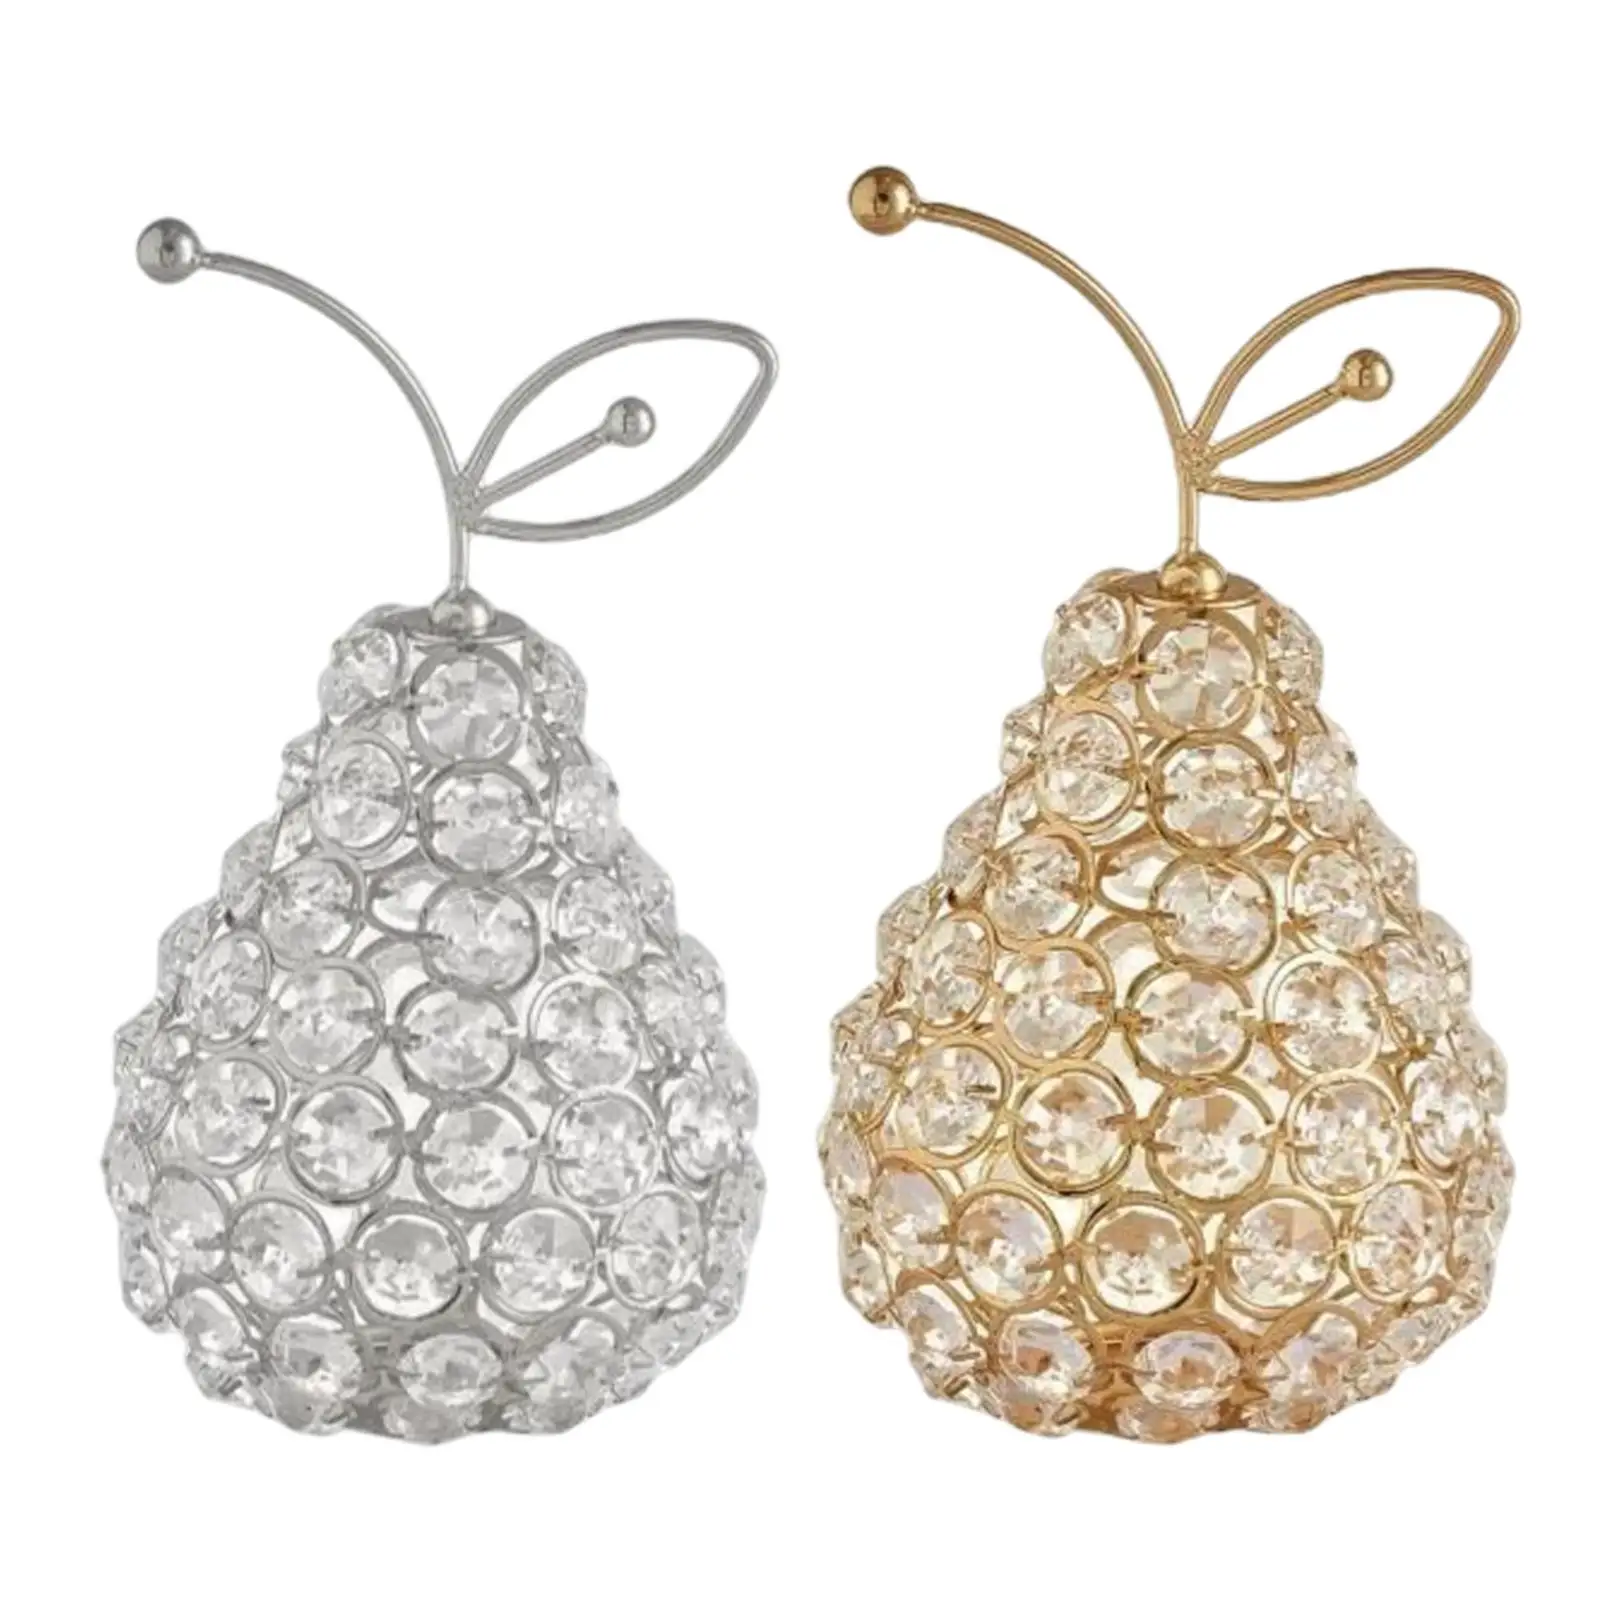 2-pack Glass Crystal Fruit Collectible Figurines Shiny Rhinestone Crystal Pear Home Decor Wedding Ornament